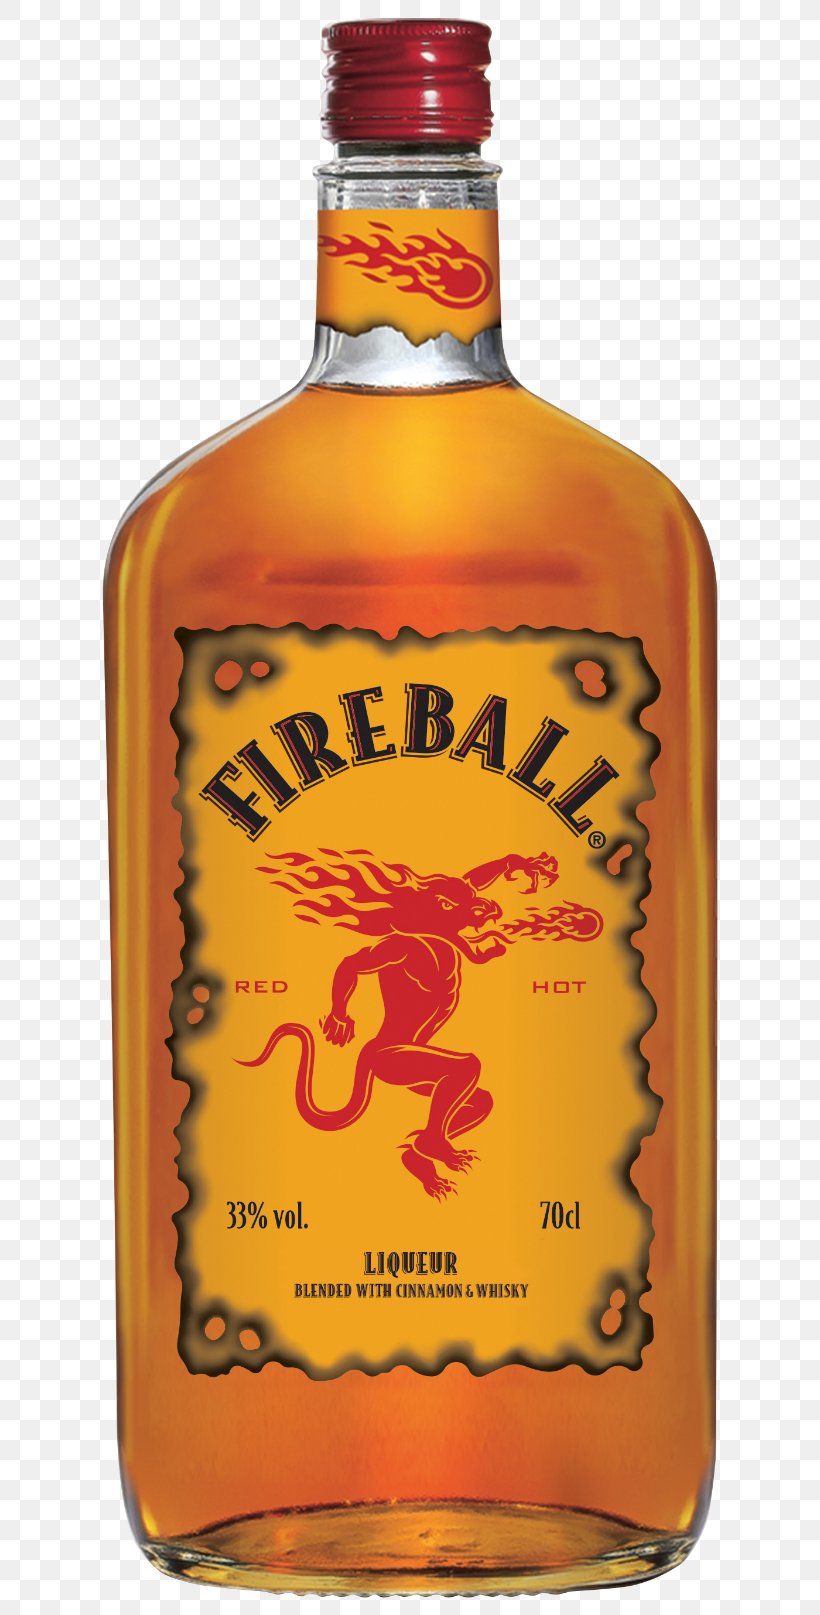 Fireball Cinnamon Whisky Distilled Beverage Whiskey Canadian Whisky Liqueur, PNG, 650x1615px, Fireball Cinnamon Whisky, Alcoholic Beverage, Bottle, Canadian Mist, Canadian Whisky Download Free